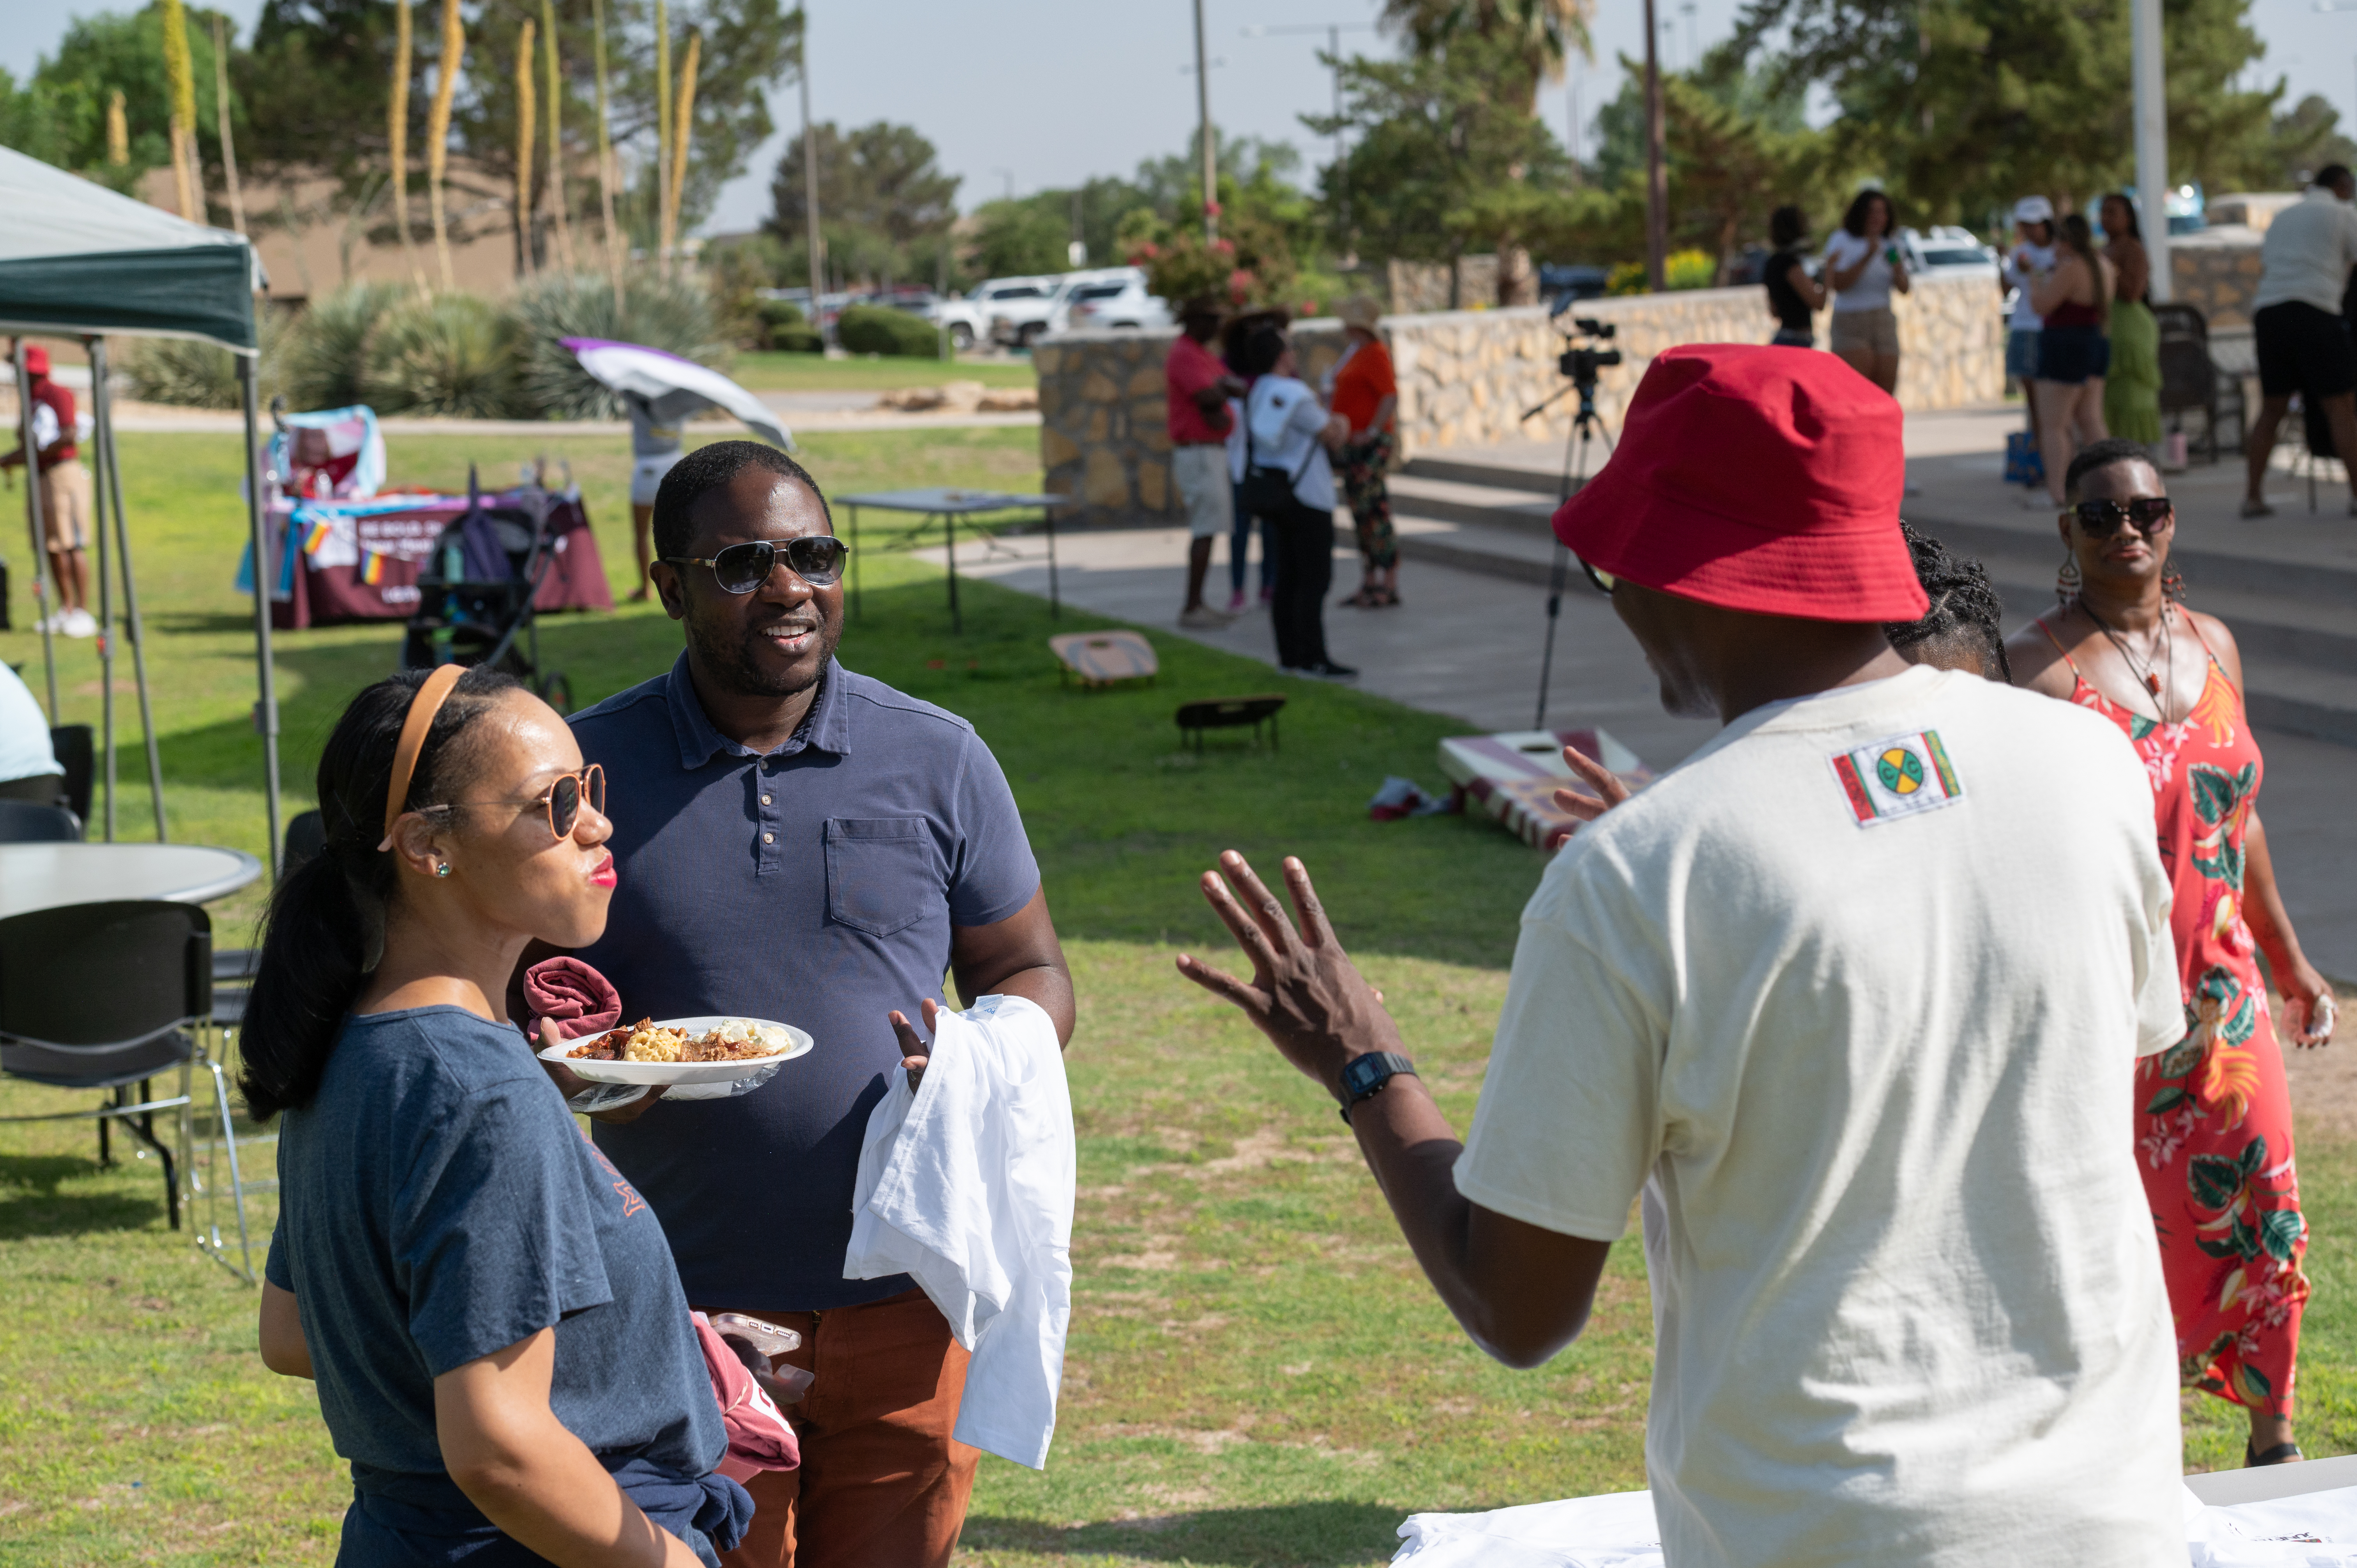 Picture from the celebration of Juneteenth, The image portrays a casual outdoor gathering on a sunny day, possibly a picnic or community event in a park. In the foreground, three people are interacting. A woman with a headband and sunglasses, holding a plate of food, stands facing two men. The man in a navy blue polo shirt and sunglasses appears to be engaged in conversation with another man wearing a white T-shirt with a small multicolored logo on the back and a red bucket hat, who is gesturing with one hand. In the background, other people are scattered around the park, with some standing and others seated. A green canopy tent is set up to the left, alongside tables and chairs. In the mid-ground to the left, another table appears to display an informational banner with unclear text. The park is lush with green grass and has various trees and shrubbery around, with a stone wall and sidewalk in the distance. The sky above is bright and clear.